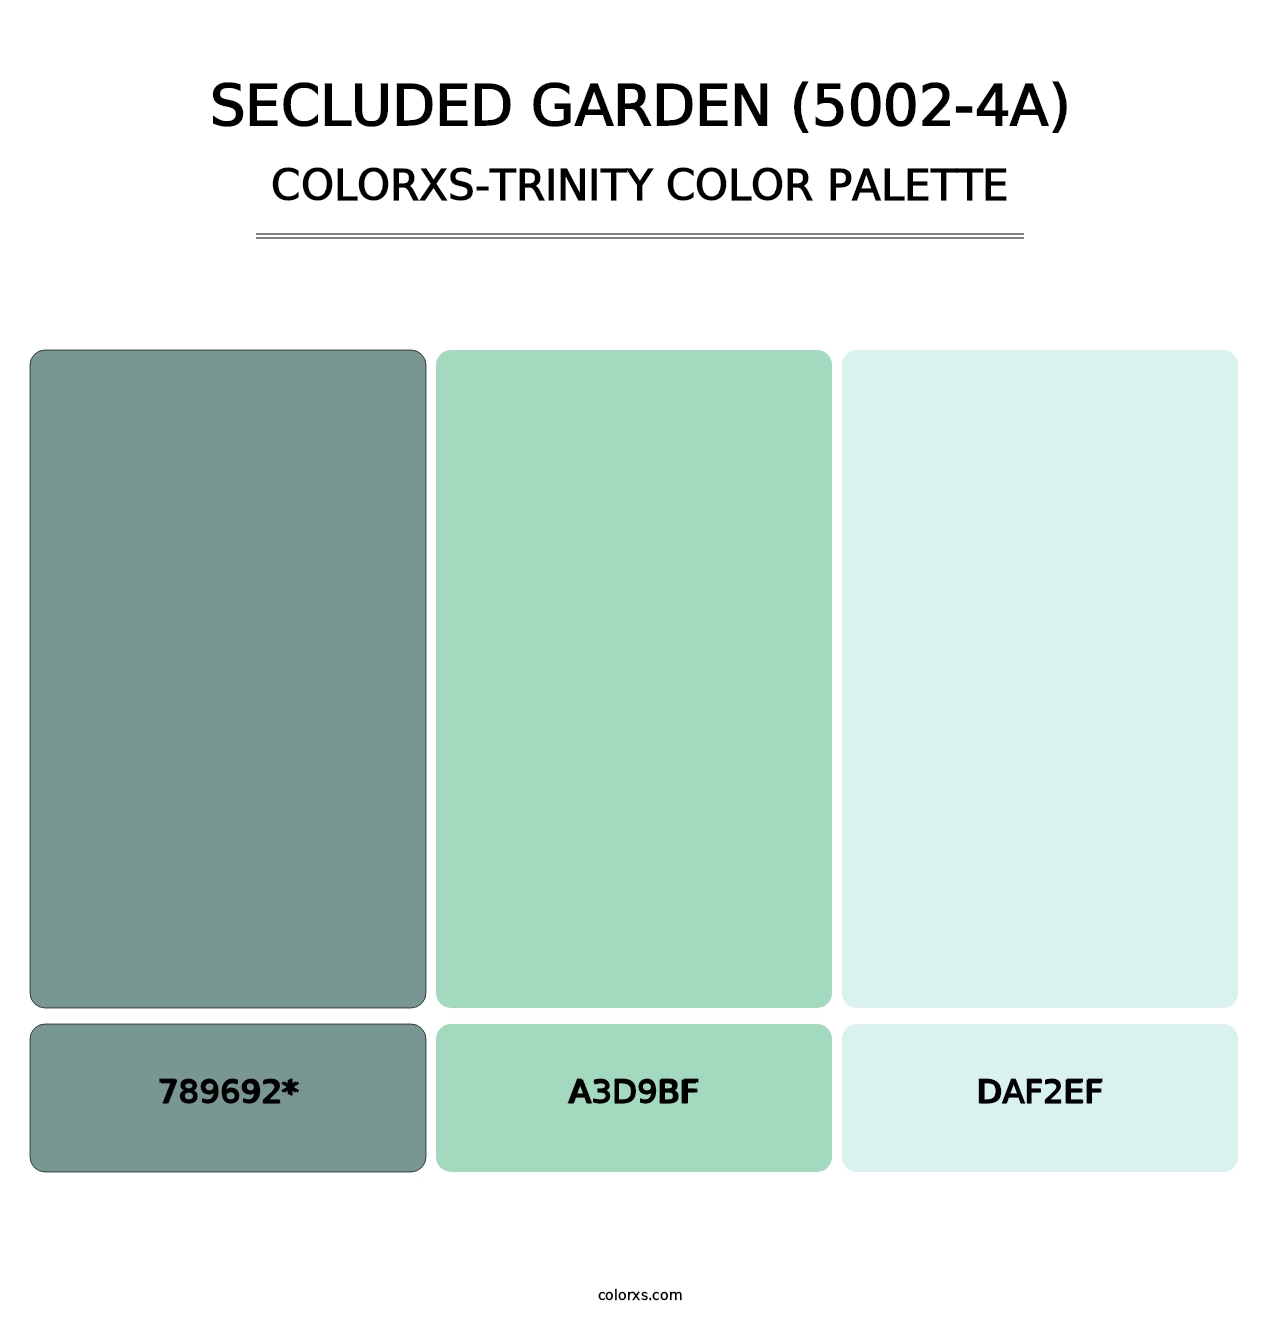 Secluded Garden (5002-4A) - Colorxs Trinity Palette